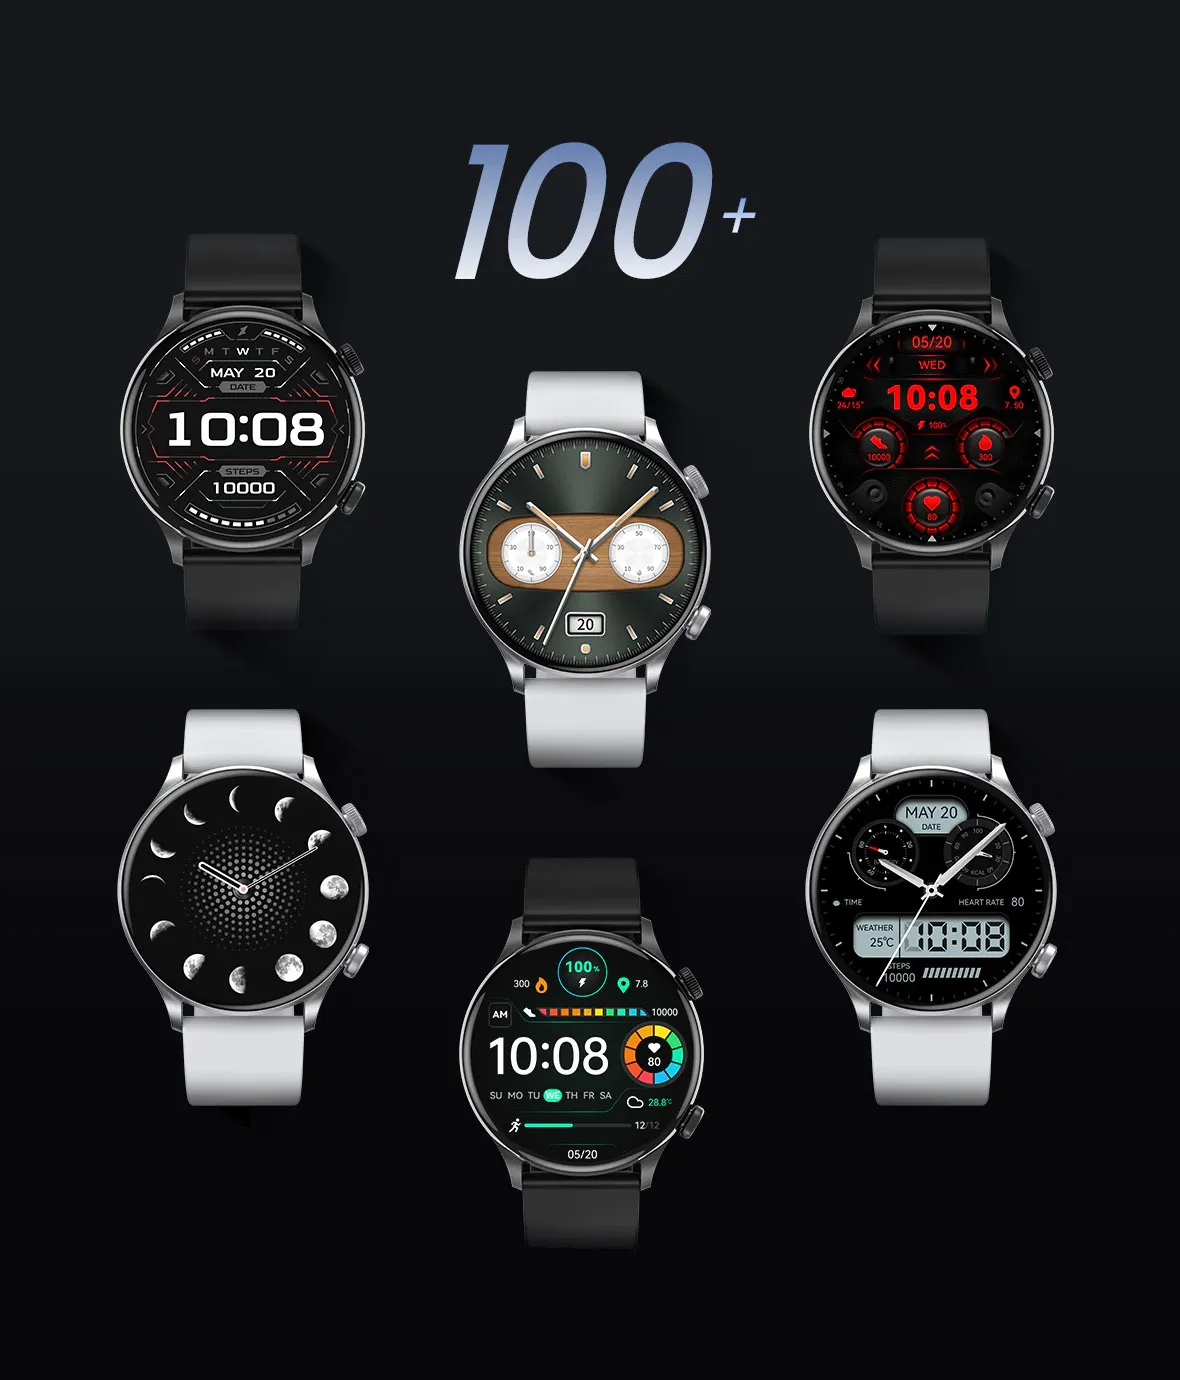 Haylou Solar Plus RT3 100+ watch faces